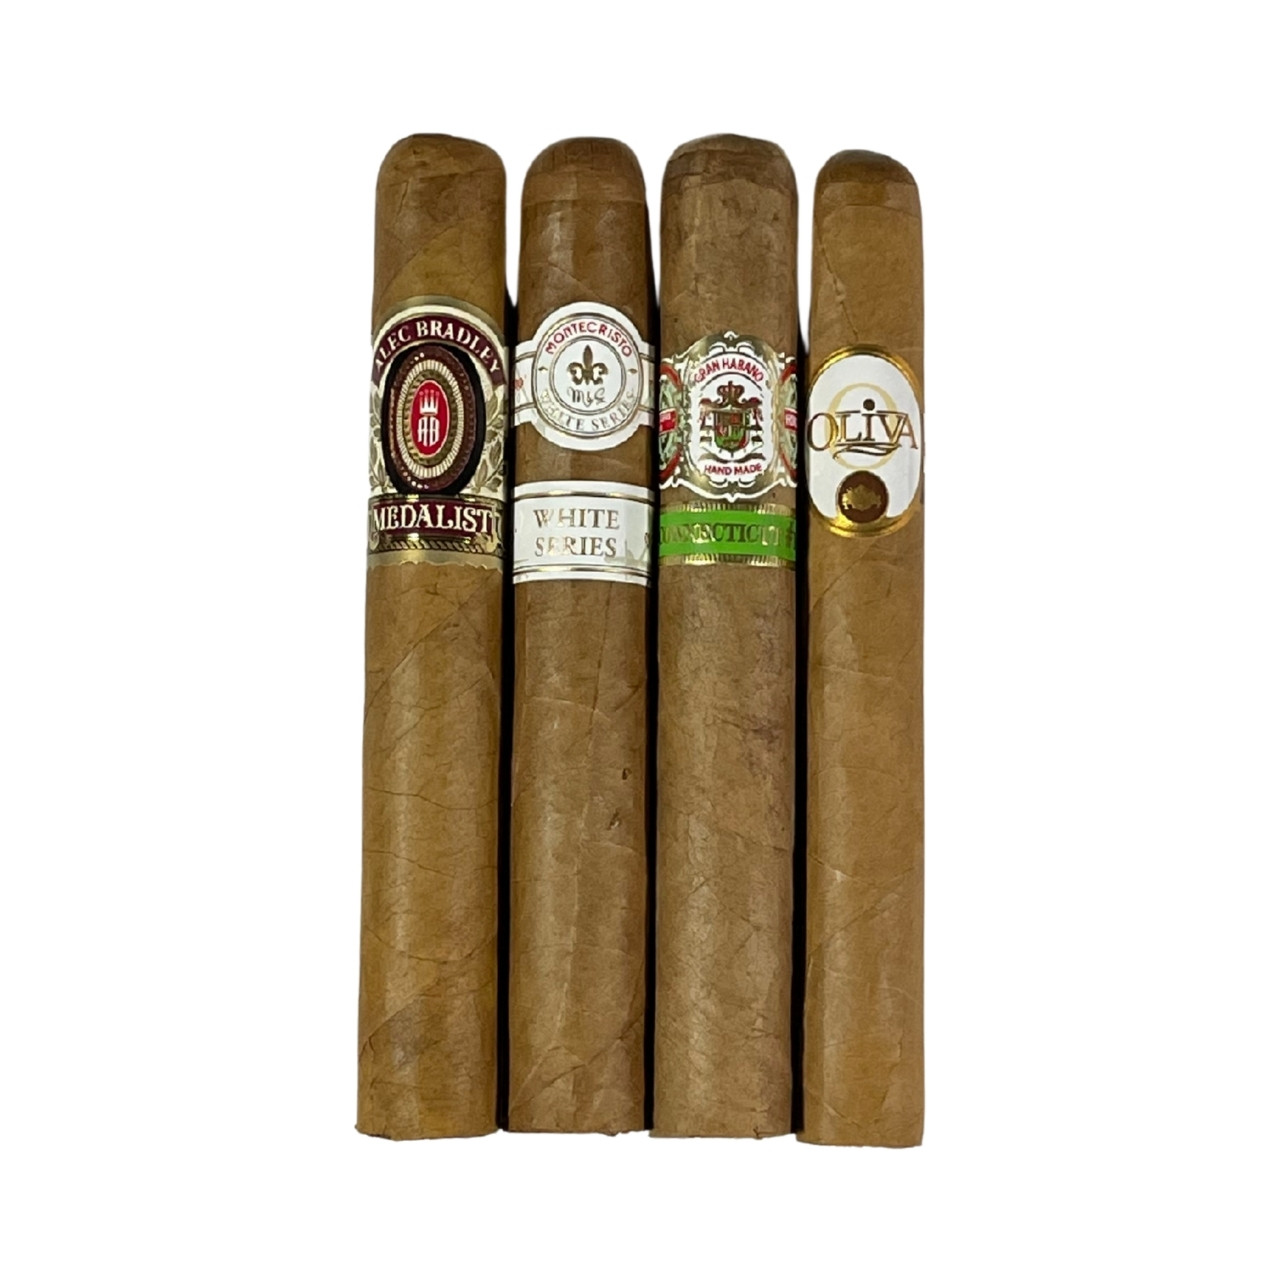 Nice selection of Connecticut shade cigars! Value with FREE shipping!!!! Sweet deal.